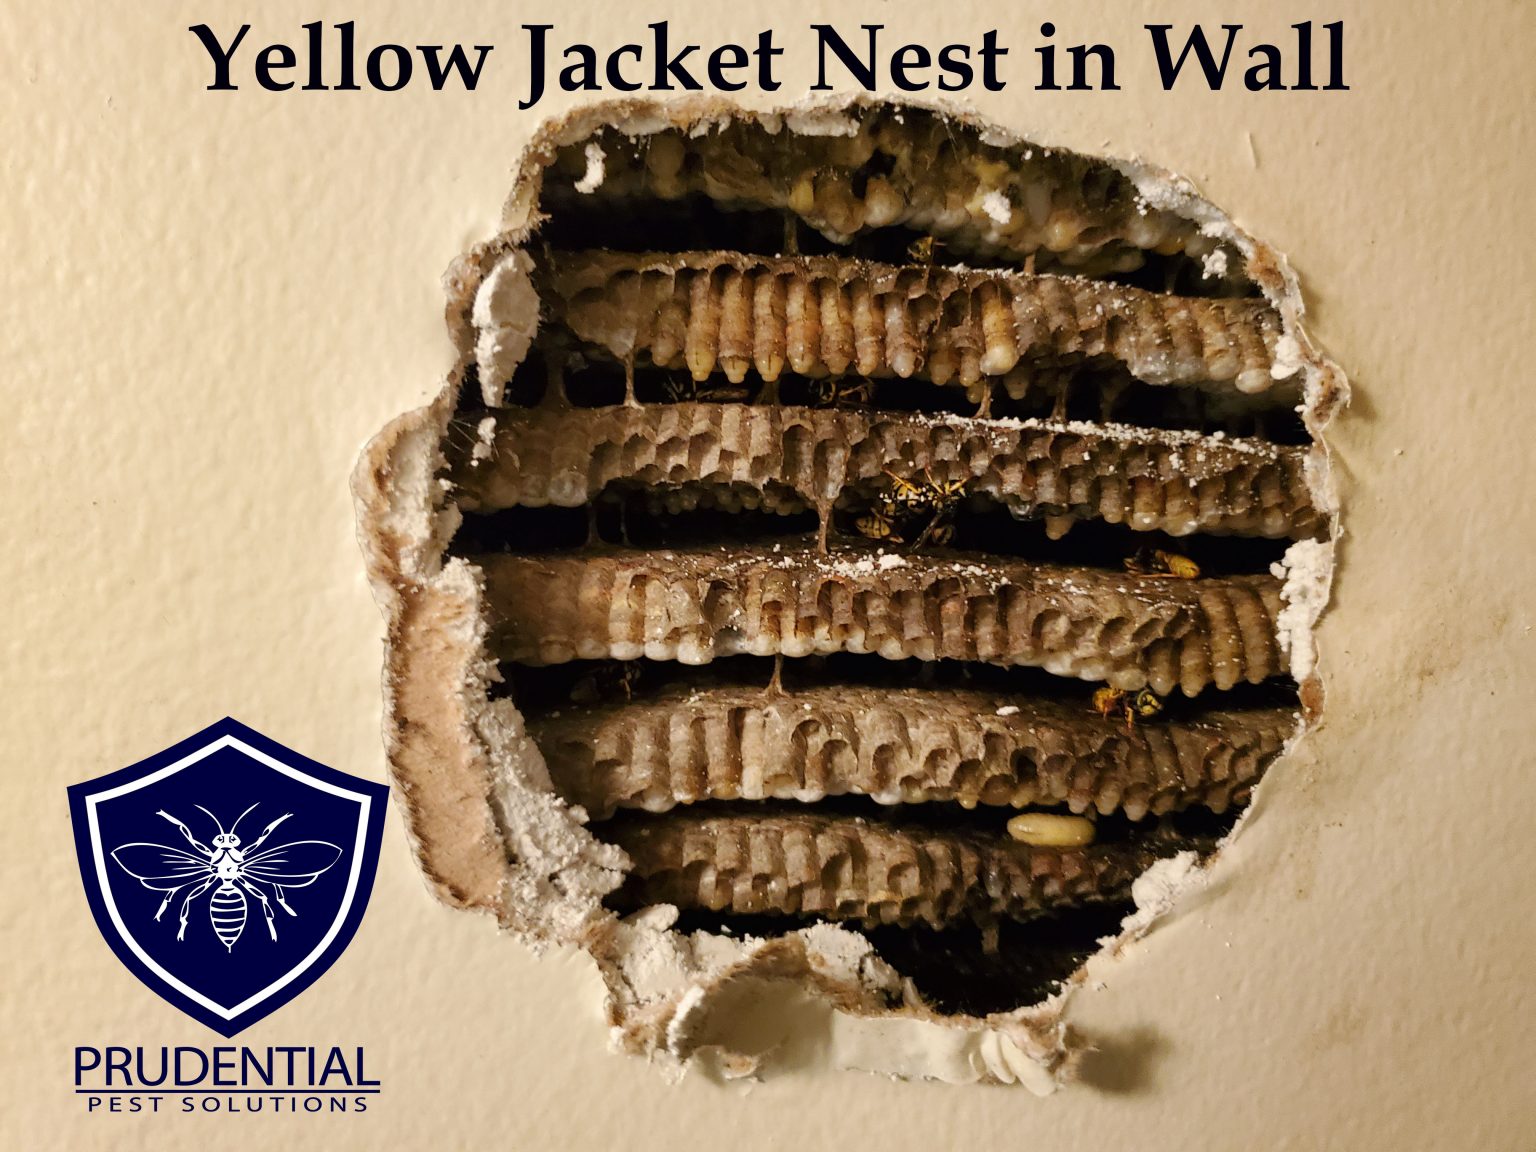 Yellow Jacket Nest in Wall Treatment - Prudential Pest Solutions